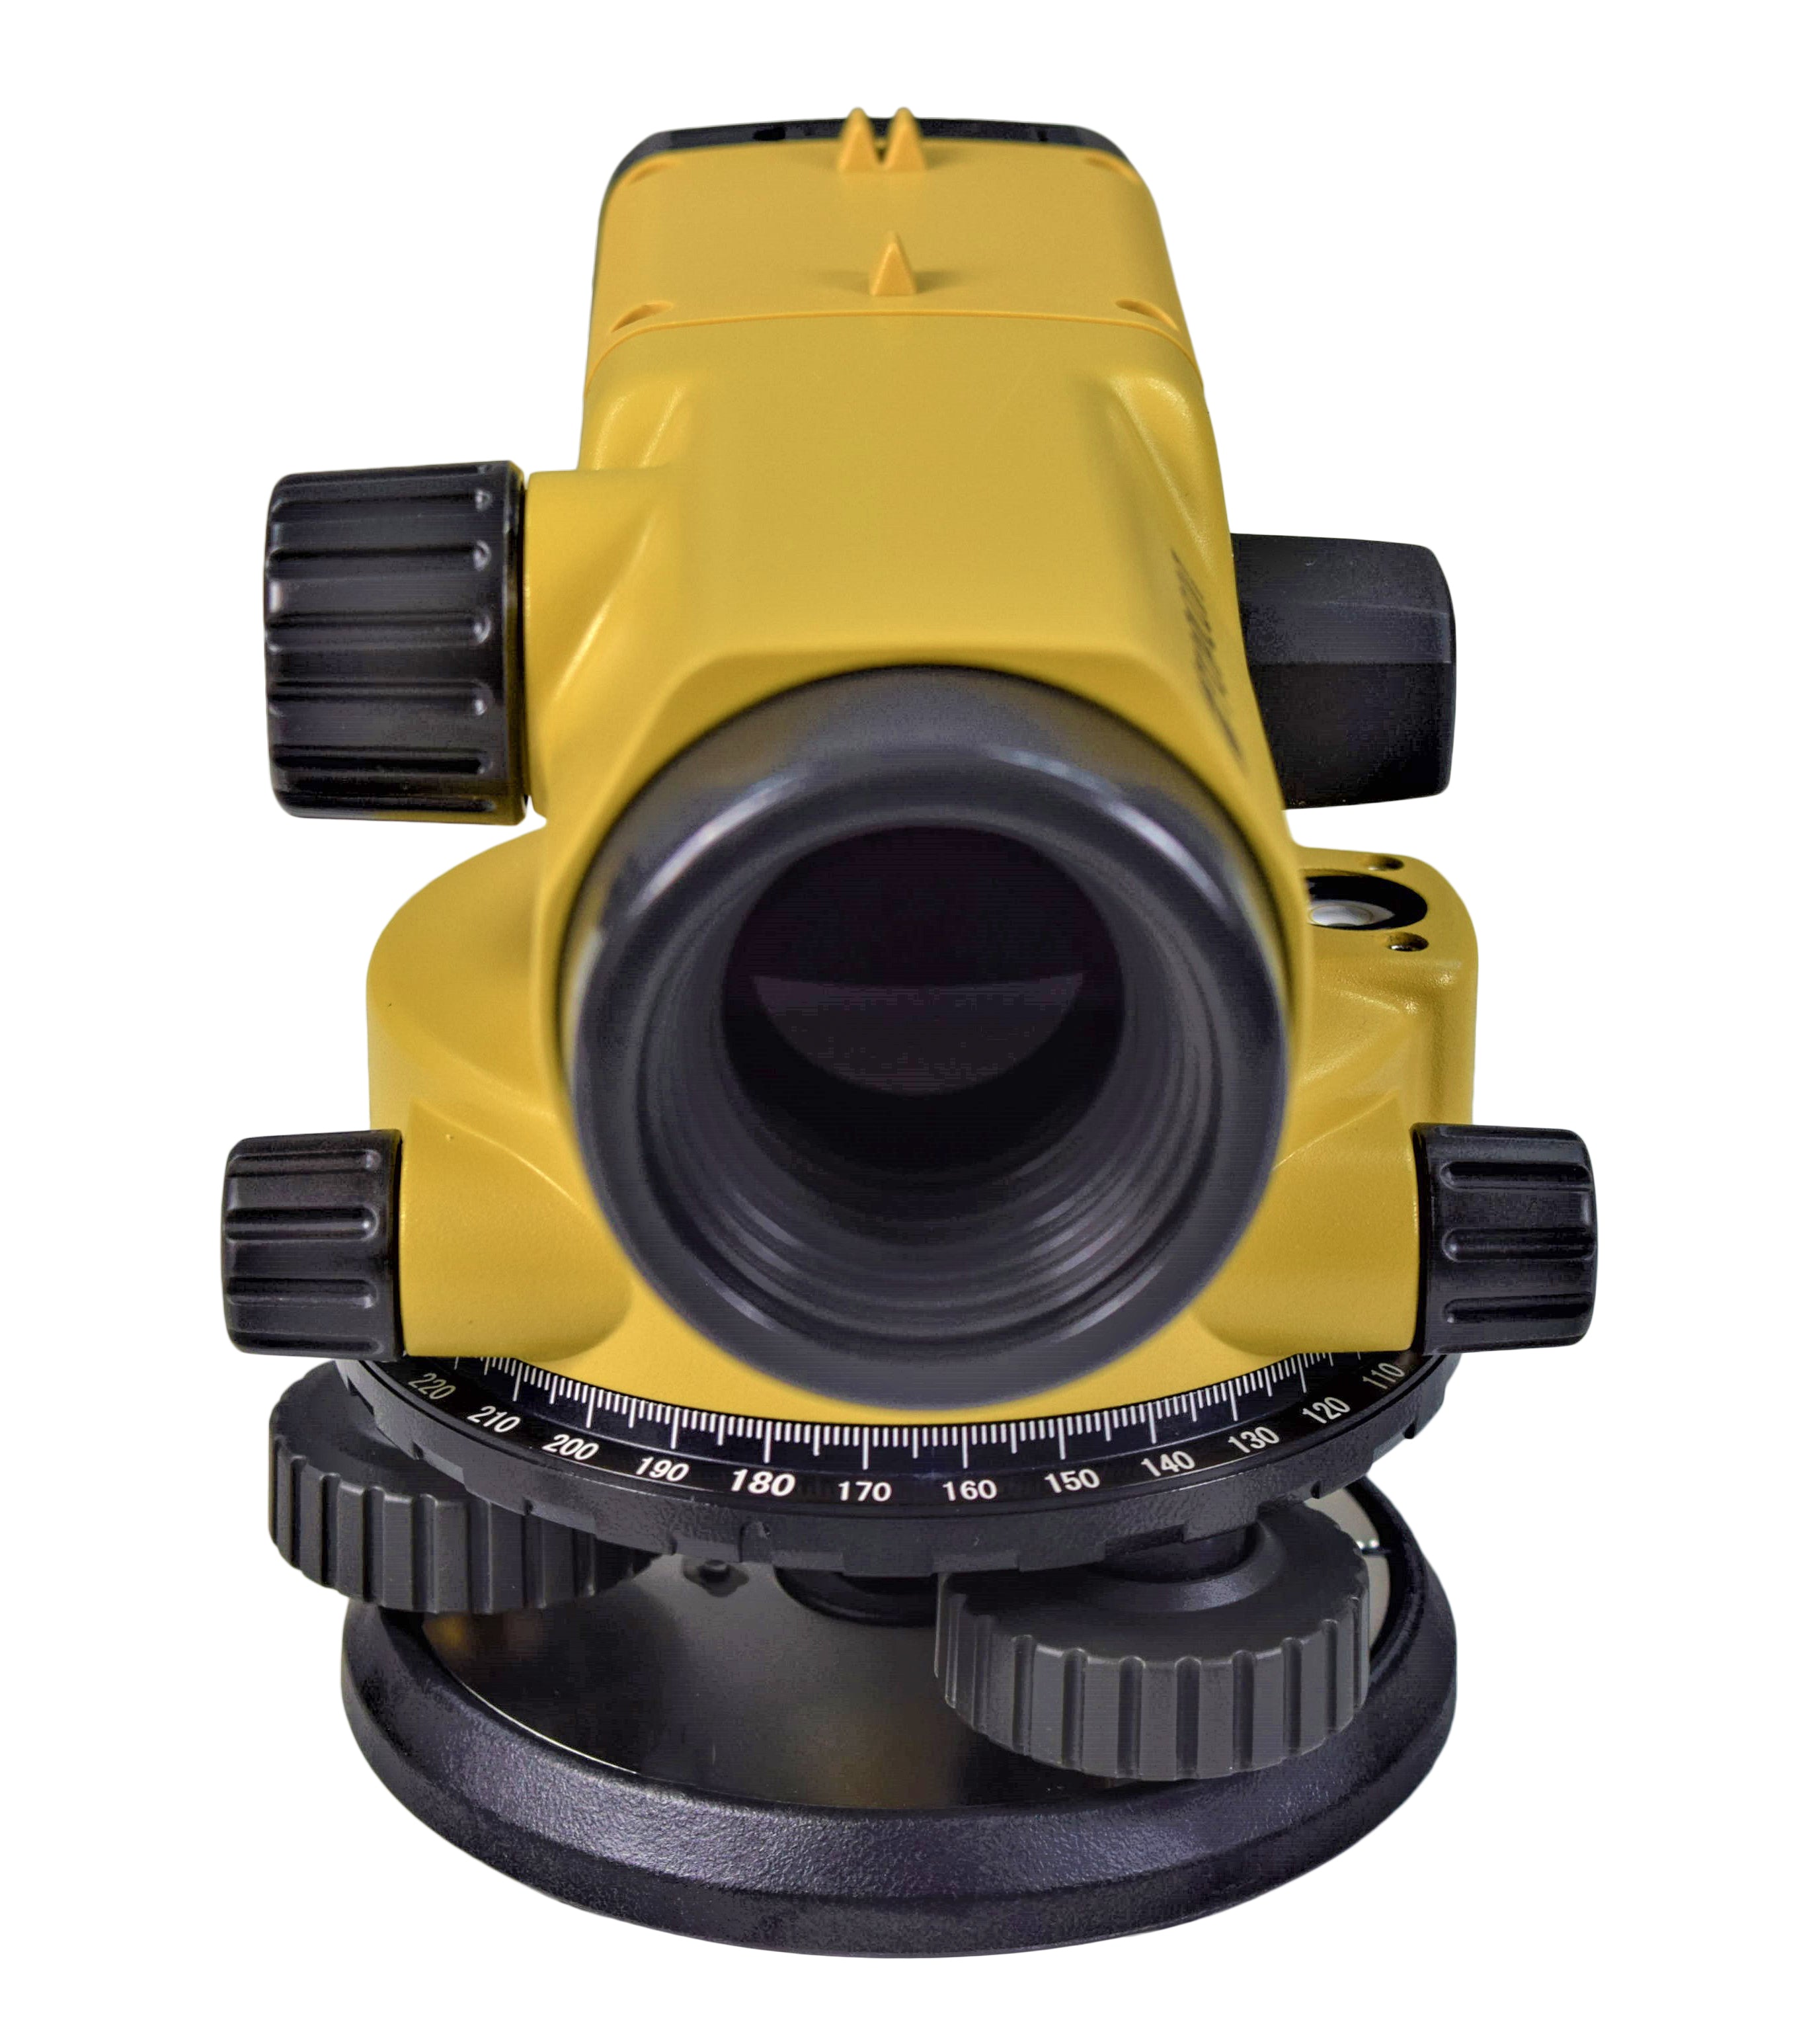 Topcon AT-B4A Heavy Duty 24X Automatic Optical Automatic Level Kit